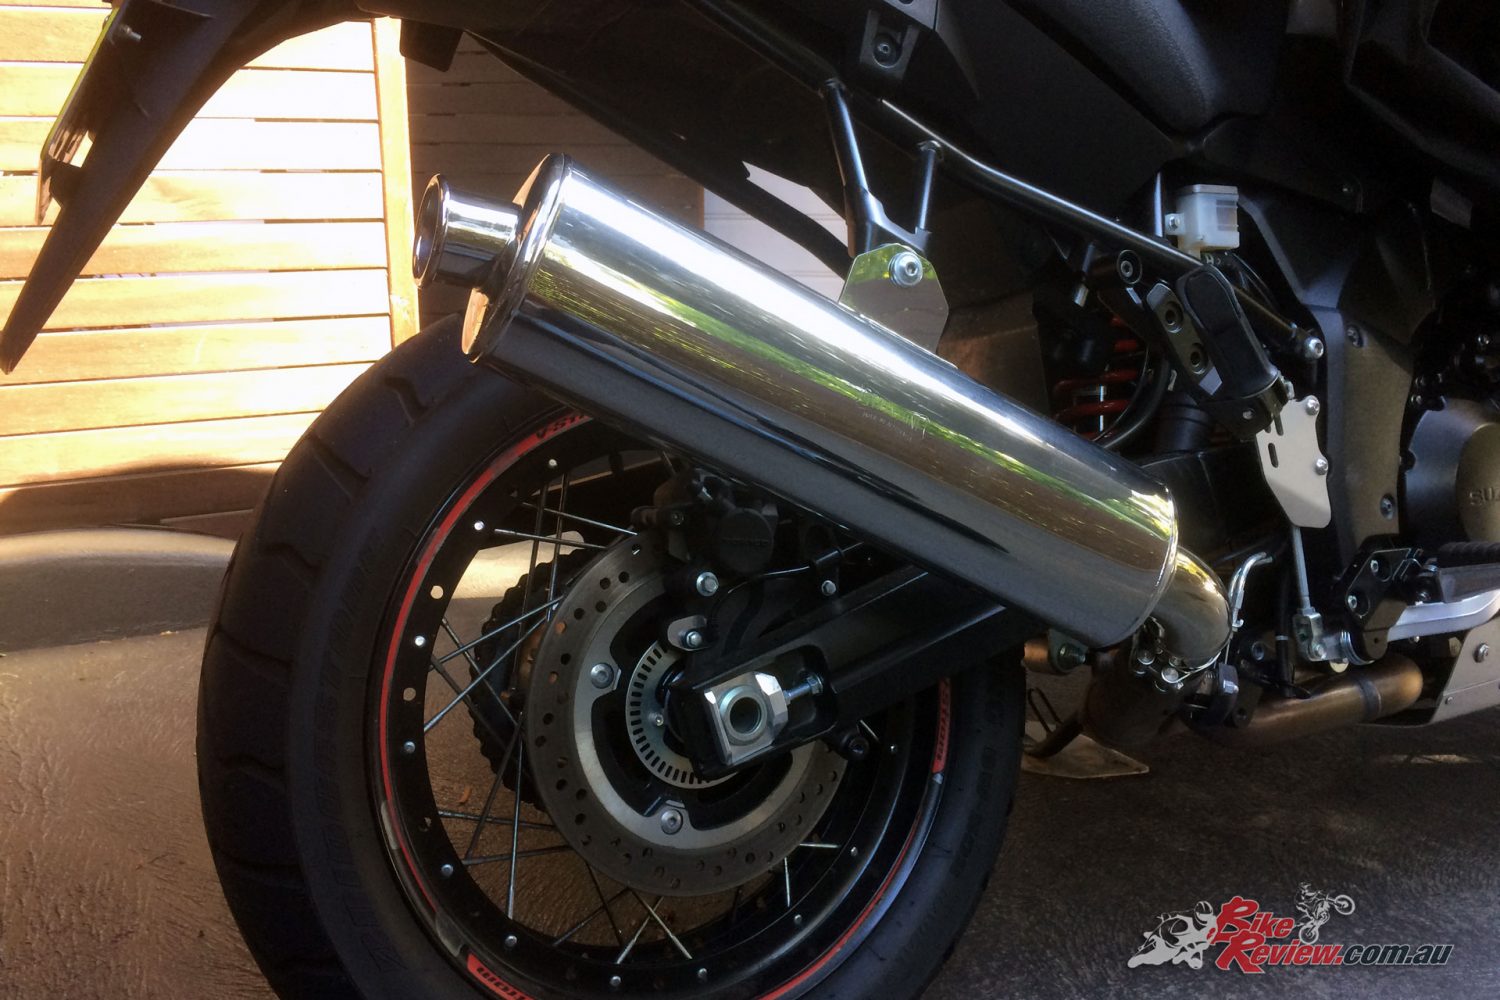 John adds a Staintune exhaust and DNA airfilter to his V-Strom 1000